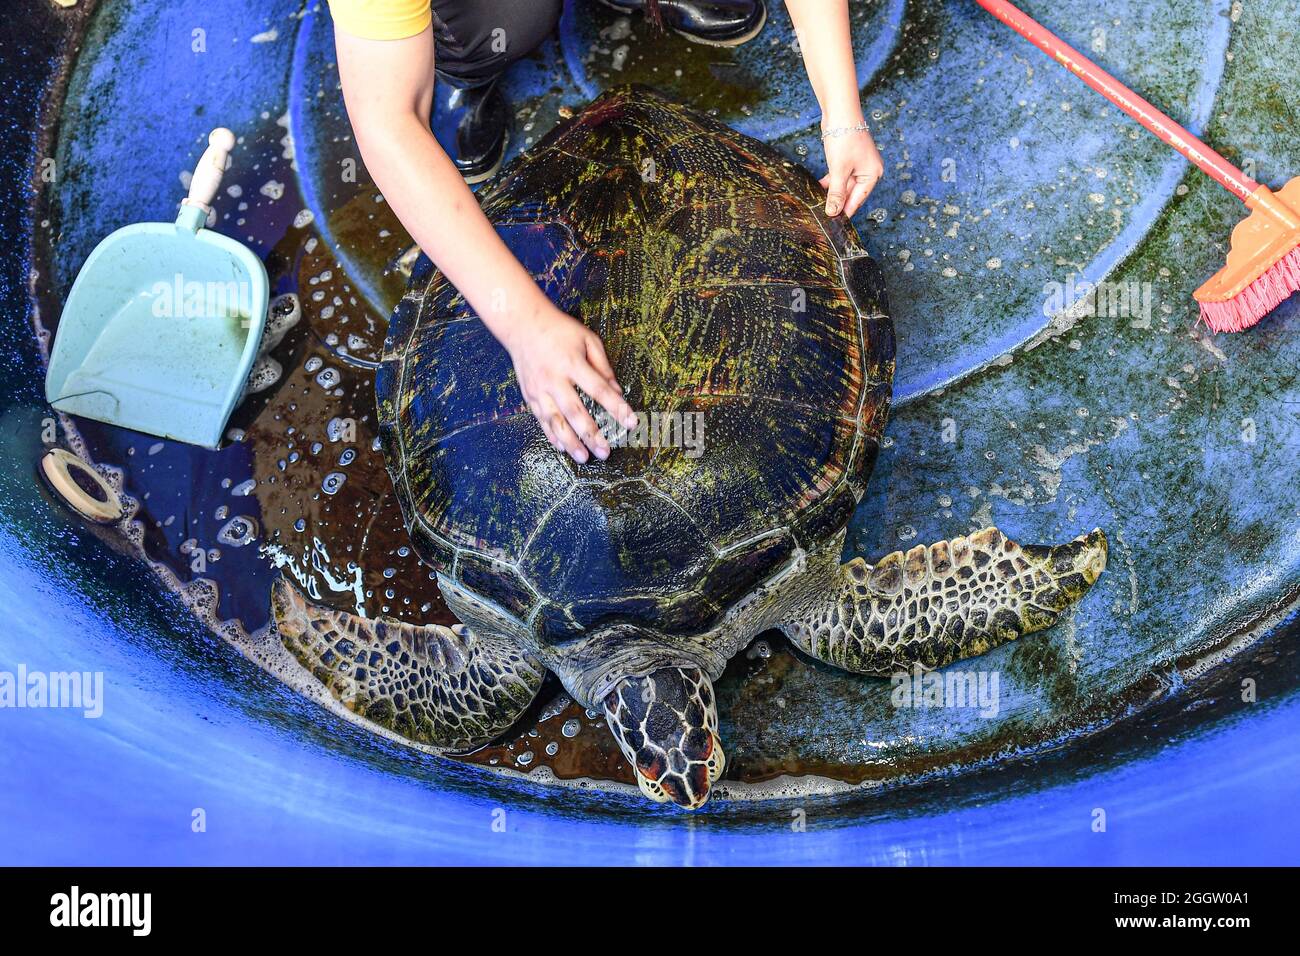 (210903) -- HAIKOU, Sept. 3, 2021 (Xinhua) -- A volunteer cleans the shell for a turtle at the 'turtle first-aid station' in Hainan Normal University in Haikou, south China's Hainan Province, on Aug. 27, 2021.  Founded in 2013, the 'turtle first-aid station' in Hainan Normal University has been devoted to helping turtles in need and raising people's awareness of turtle protection.  Run by more than 30 volunteers of biology and related majors across the university, this station cures and rehabilitates turtles.    The volunteers said they feel well paid for their arduous work when they watch ful Stock Photo